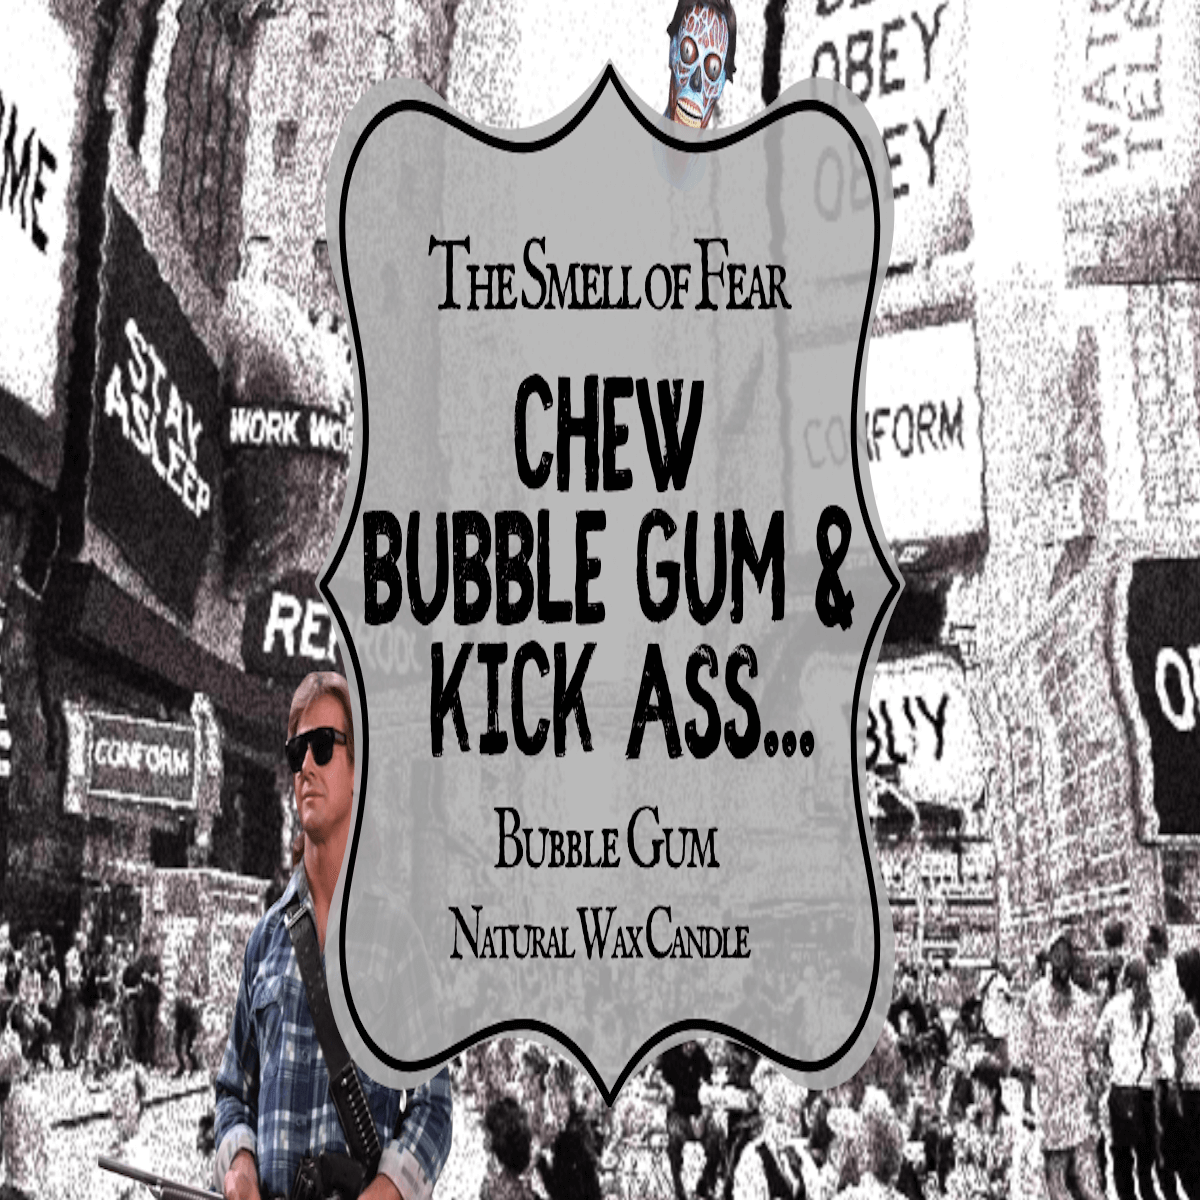 Chew Bubble Gum & Kick Ass Candle - The Smell of Fear 